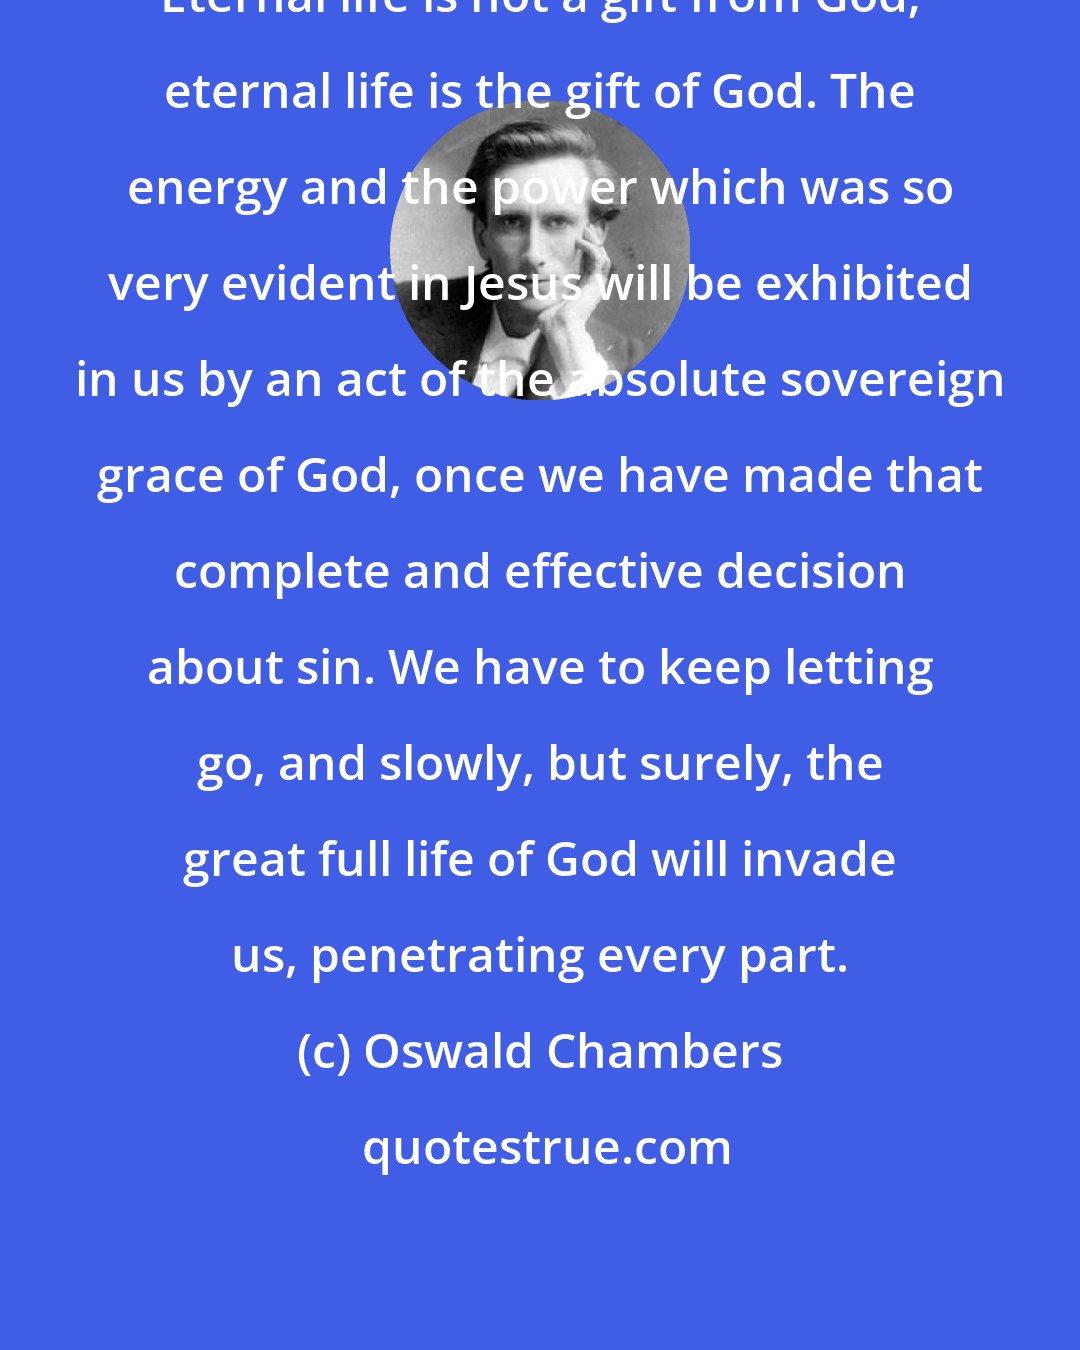 Oswald Chambers: Eternal life is not a gift from God; eternal life is the gift of God. The energy and the power which was so very evident in Jesus will be exhibited in us by an act of the absolute sovereign grace of God, once we have made that complete and effective decision about sin. We have to keep letting go, and slowly, but surely, the great full life of God will invade us, penetrating every part.